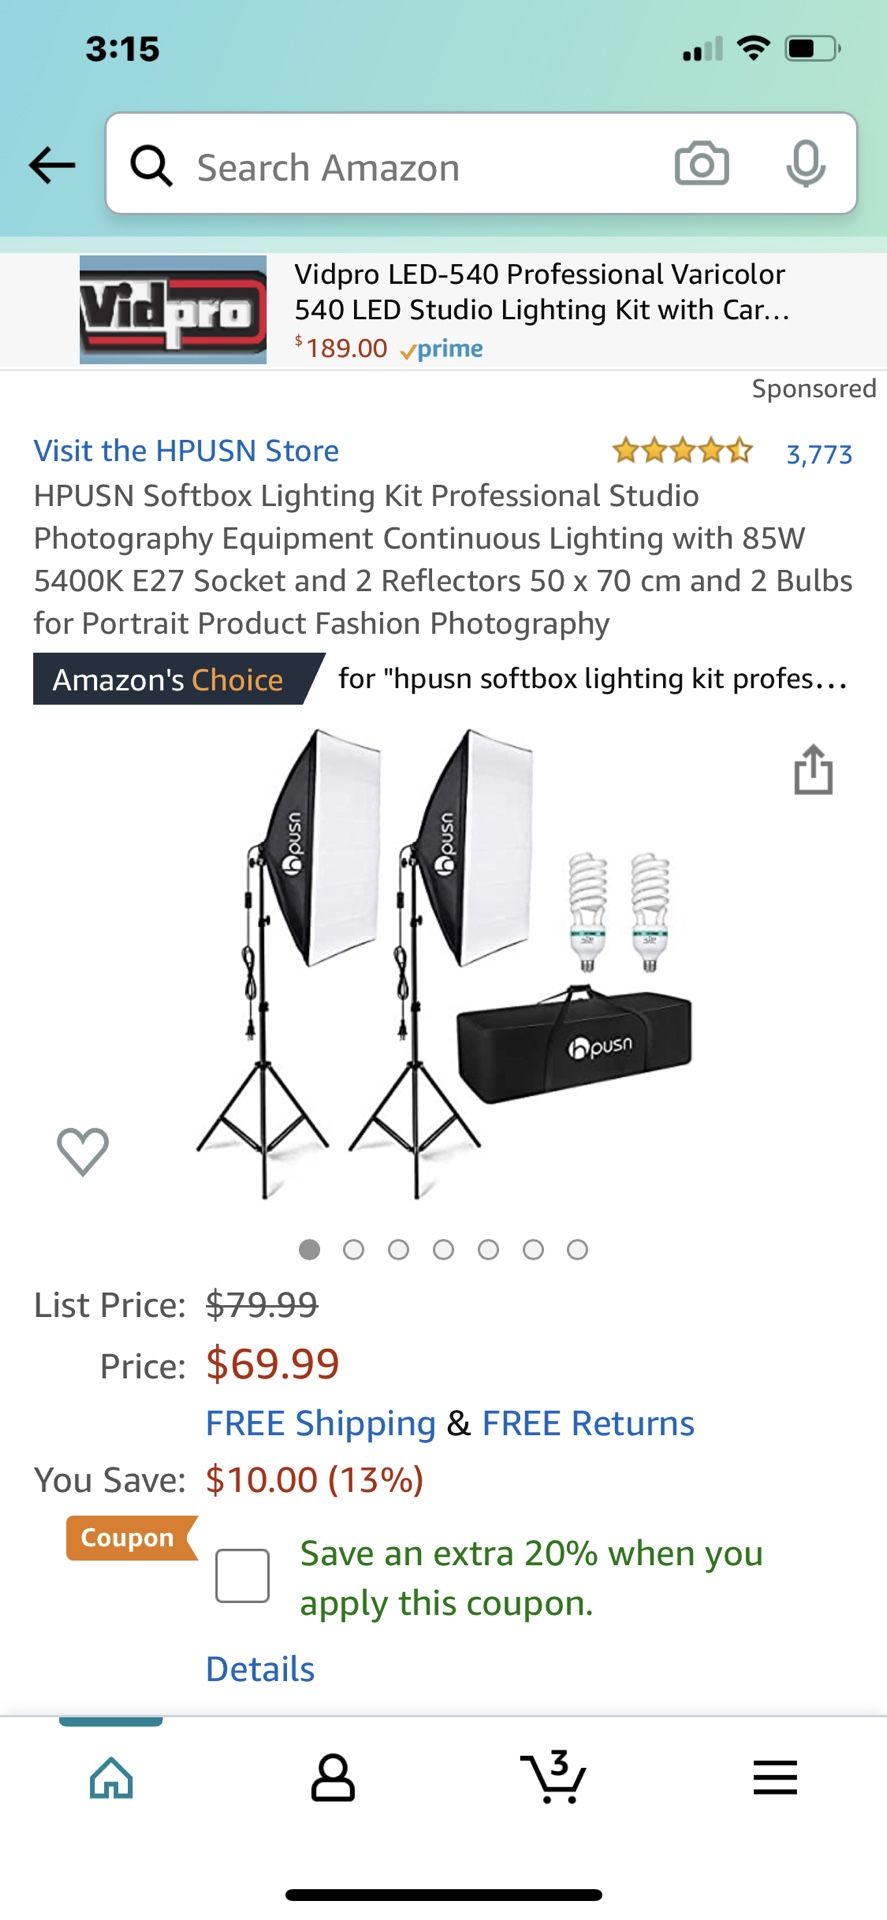 Brand New‼️ HPUSN Softbox Lighting Kit Professional Studio Photography Equipment Continuous Lighting with 85W 5400K E27 Socket and 2 Reflectors 50 x